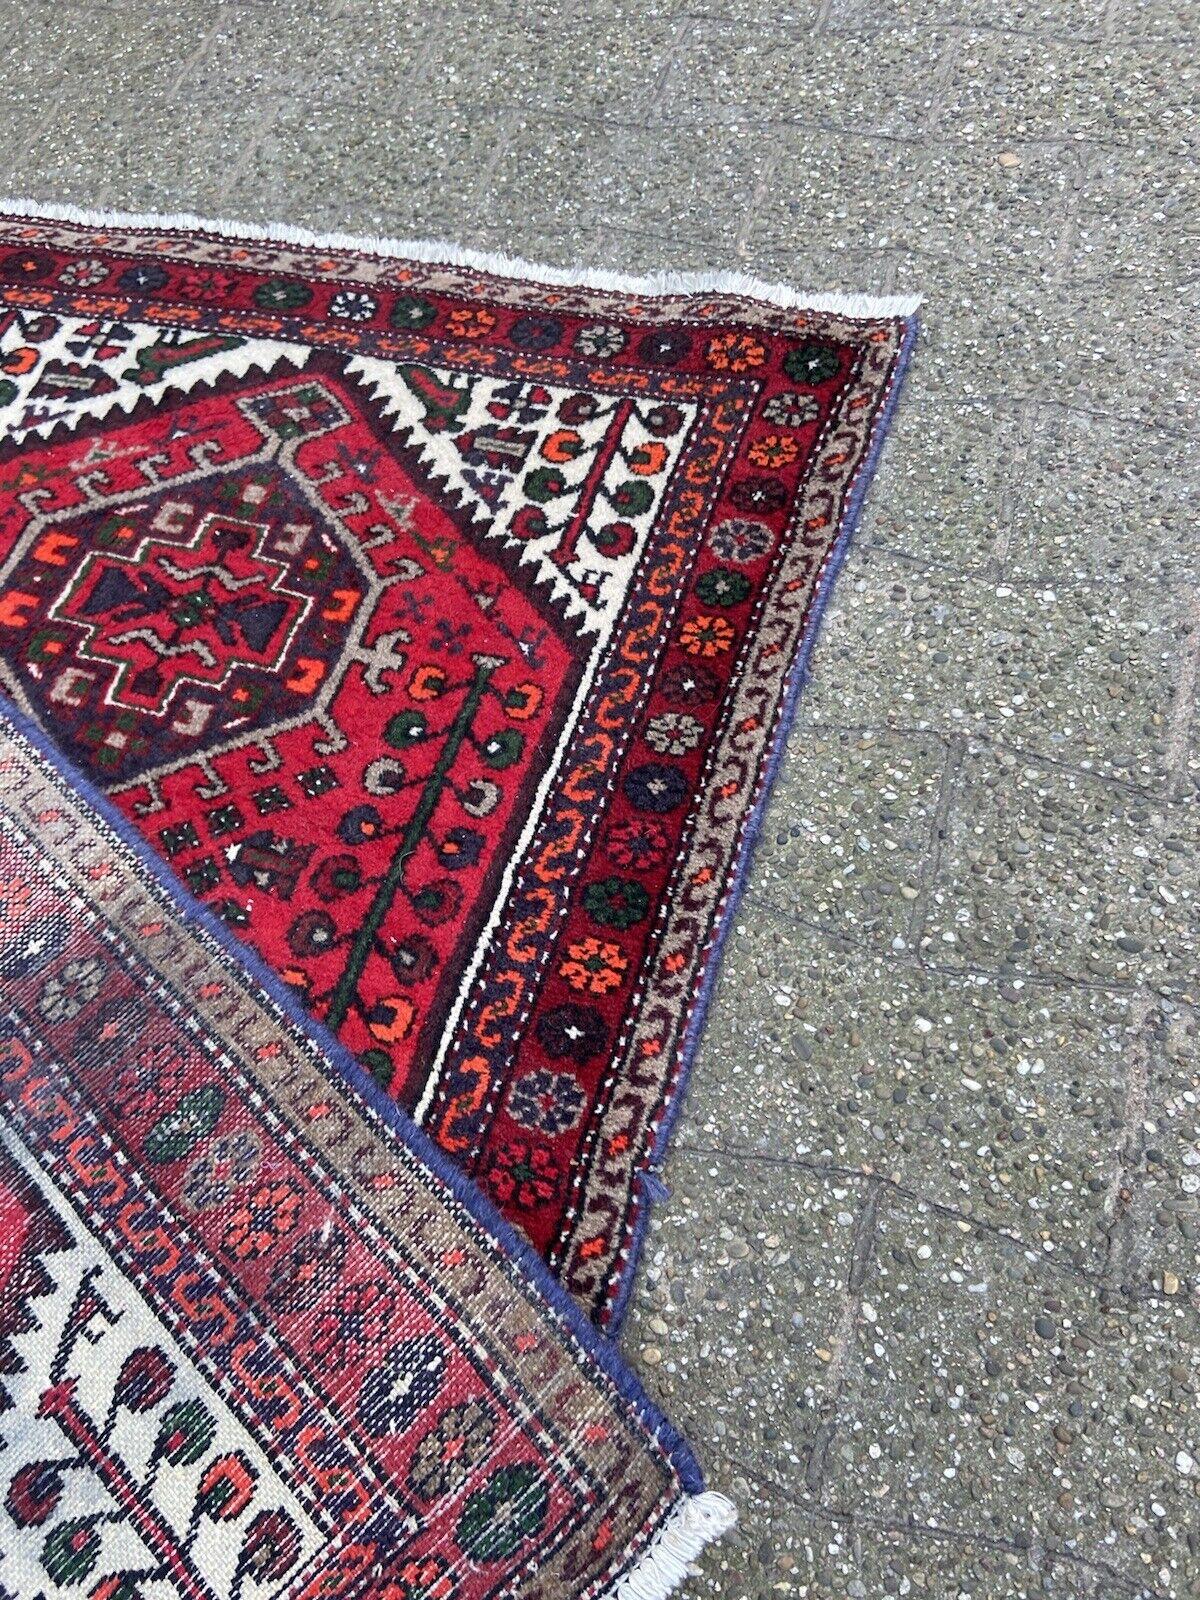 Handmade Vintage Persian Style Hamadan Rug 3.3' x 4.8', 1960s - 1S08 In Good Condition For Sale In Bordeaux, FR